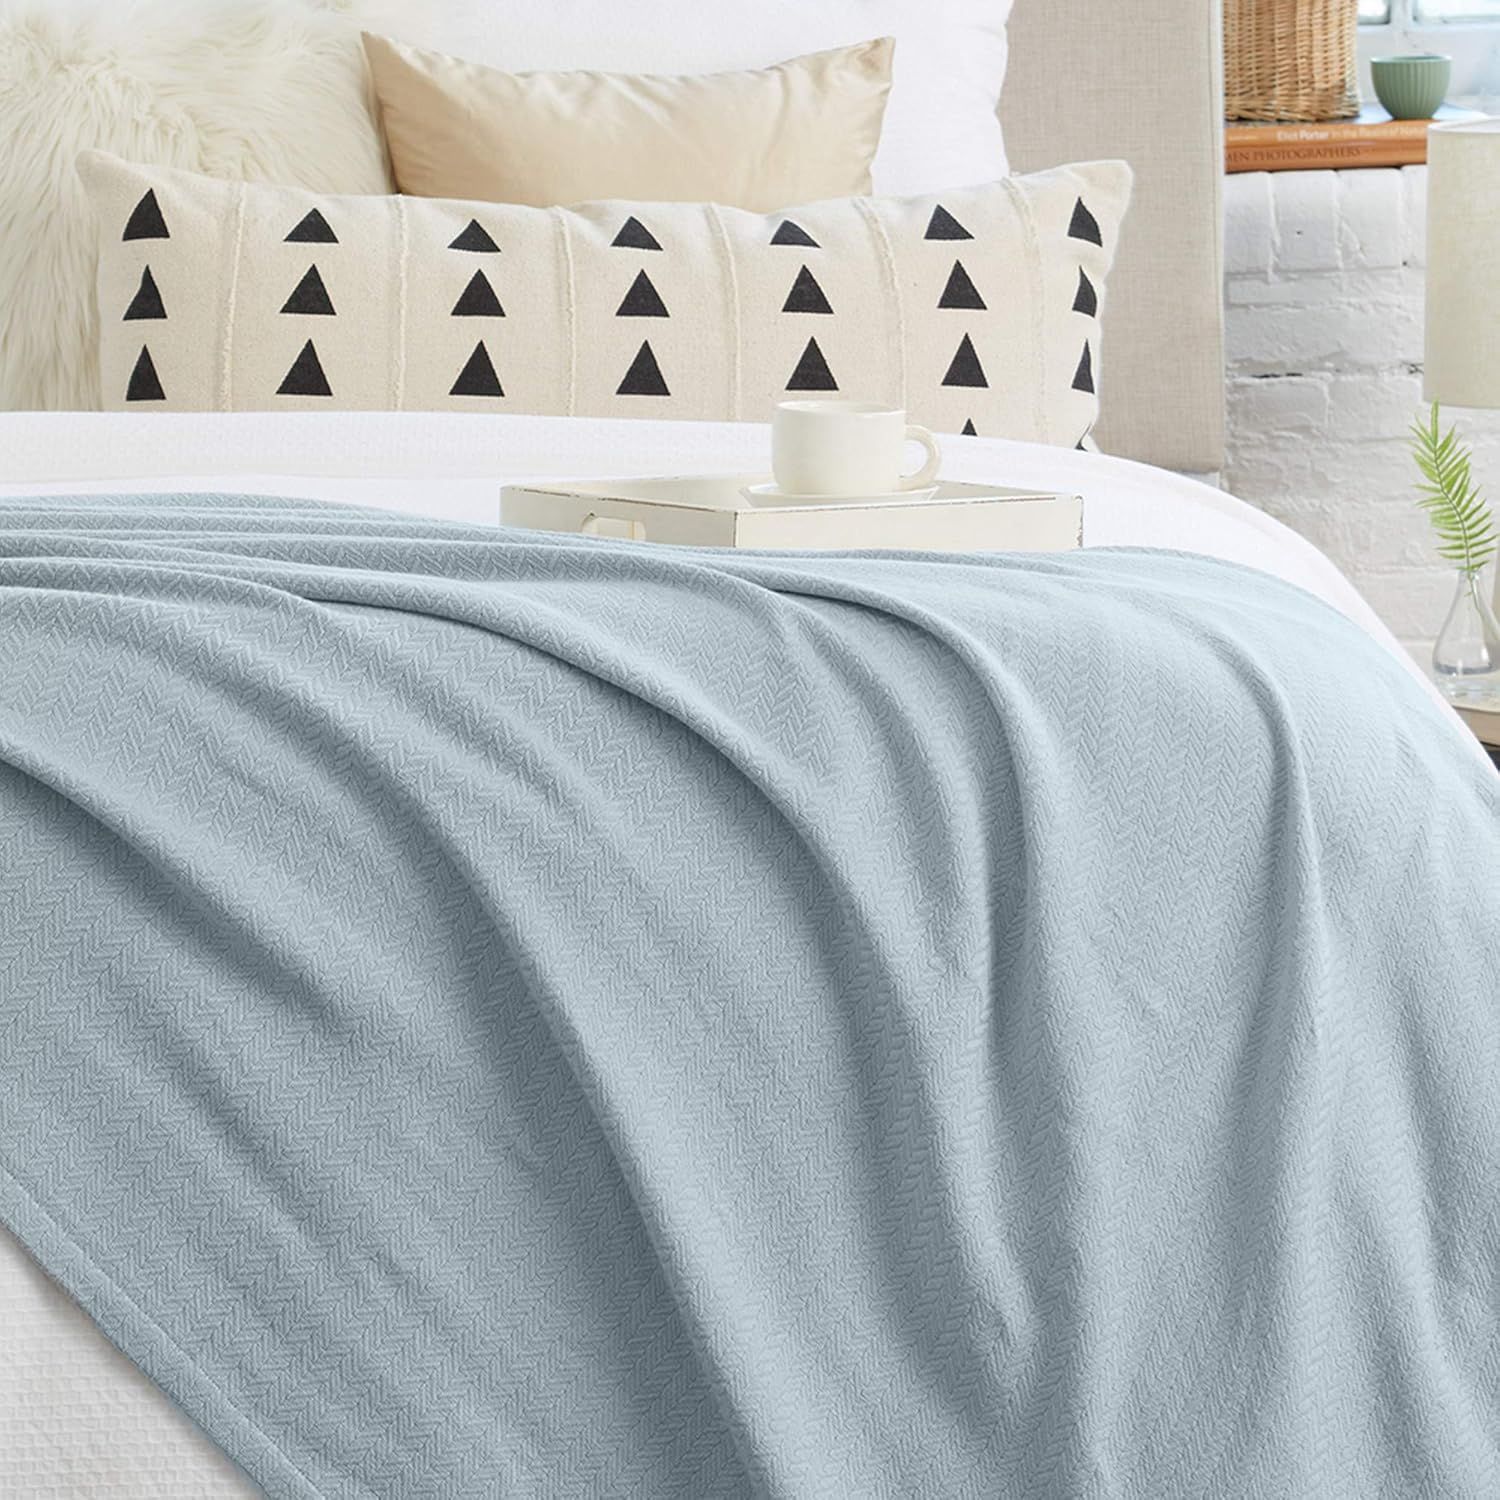 100% Ringspun Cotton Textured Weave Blanket. Lightweight and Soft, Perfect for Layering. Aurelie ... | Amazon (US)